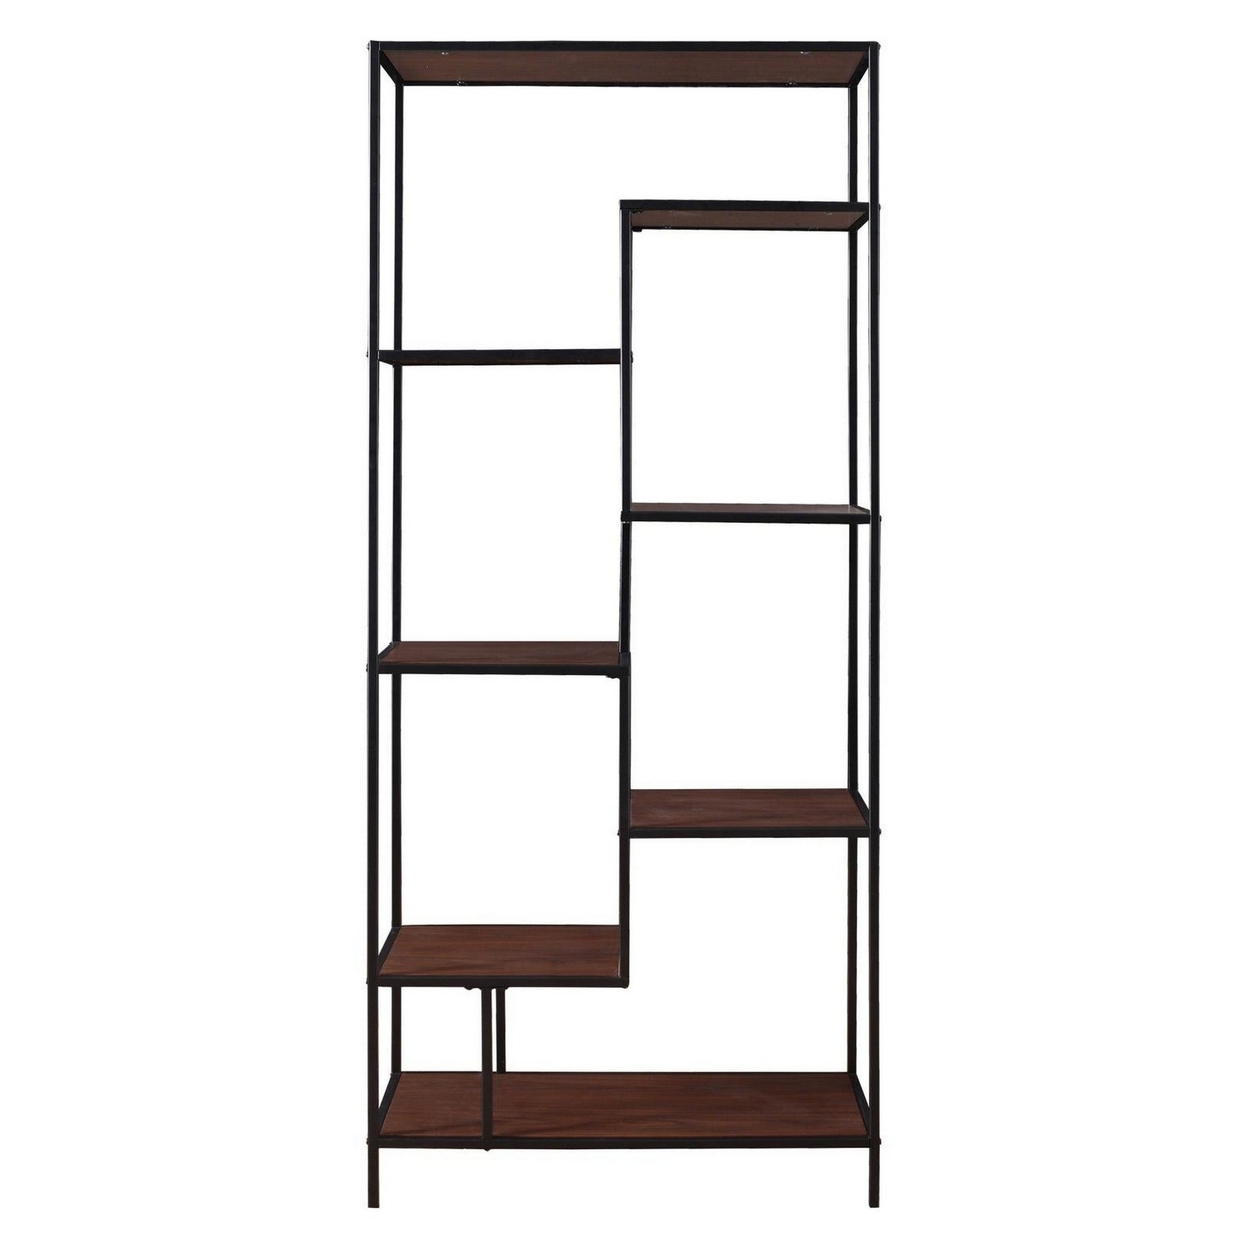 Metal Framed Bookcase With Open Shelves, Black And Brown- Saltoro Sherpi